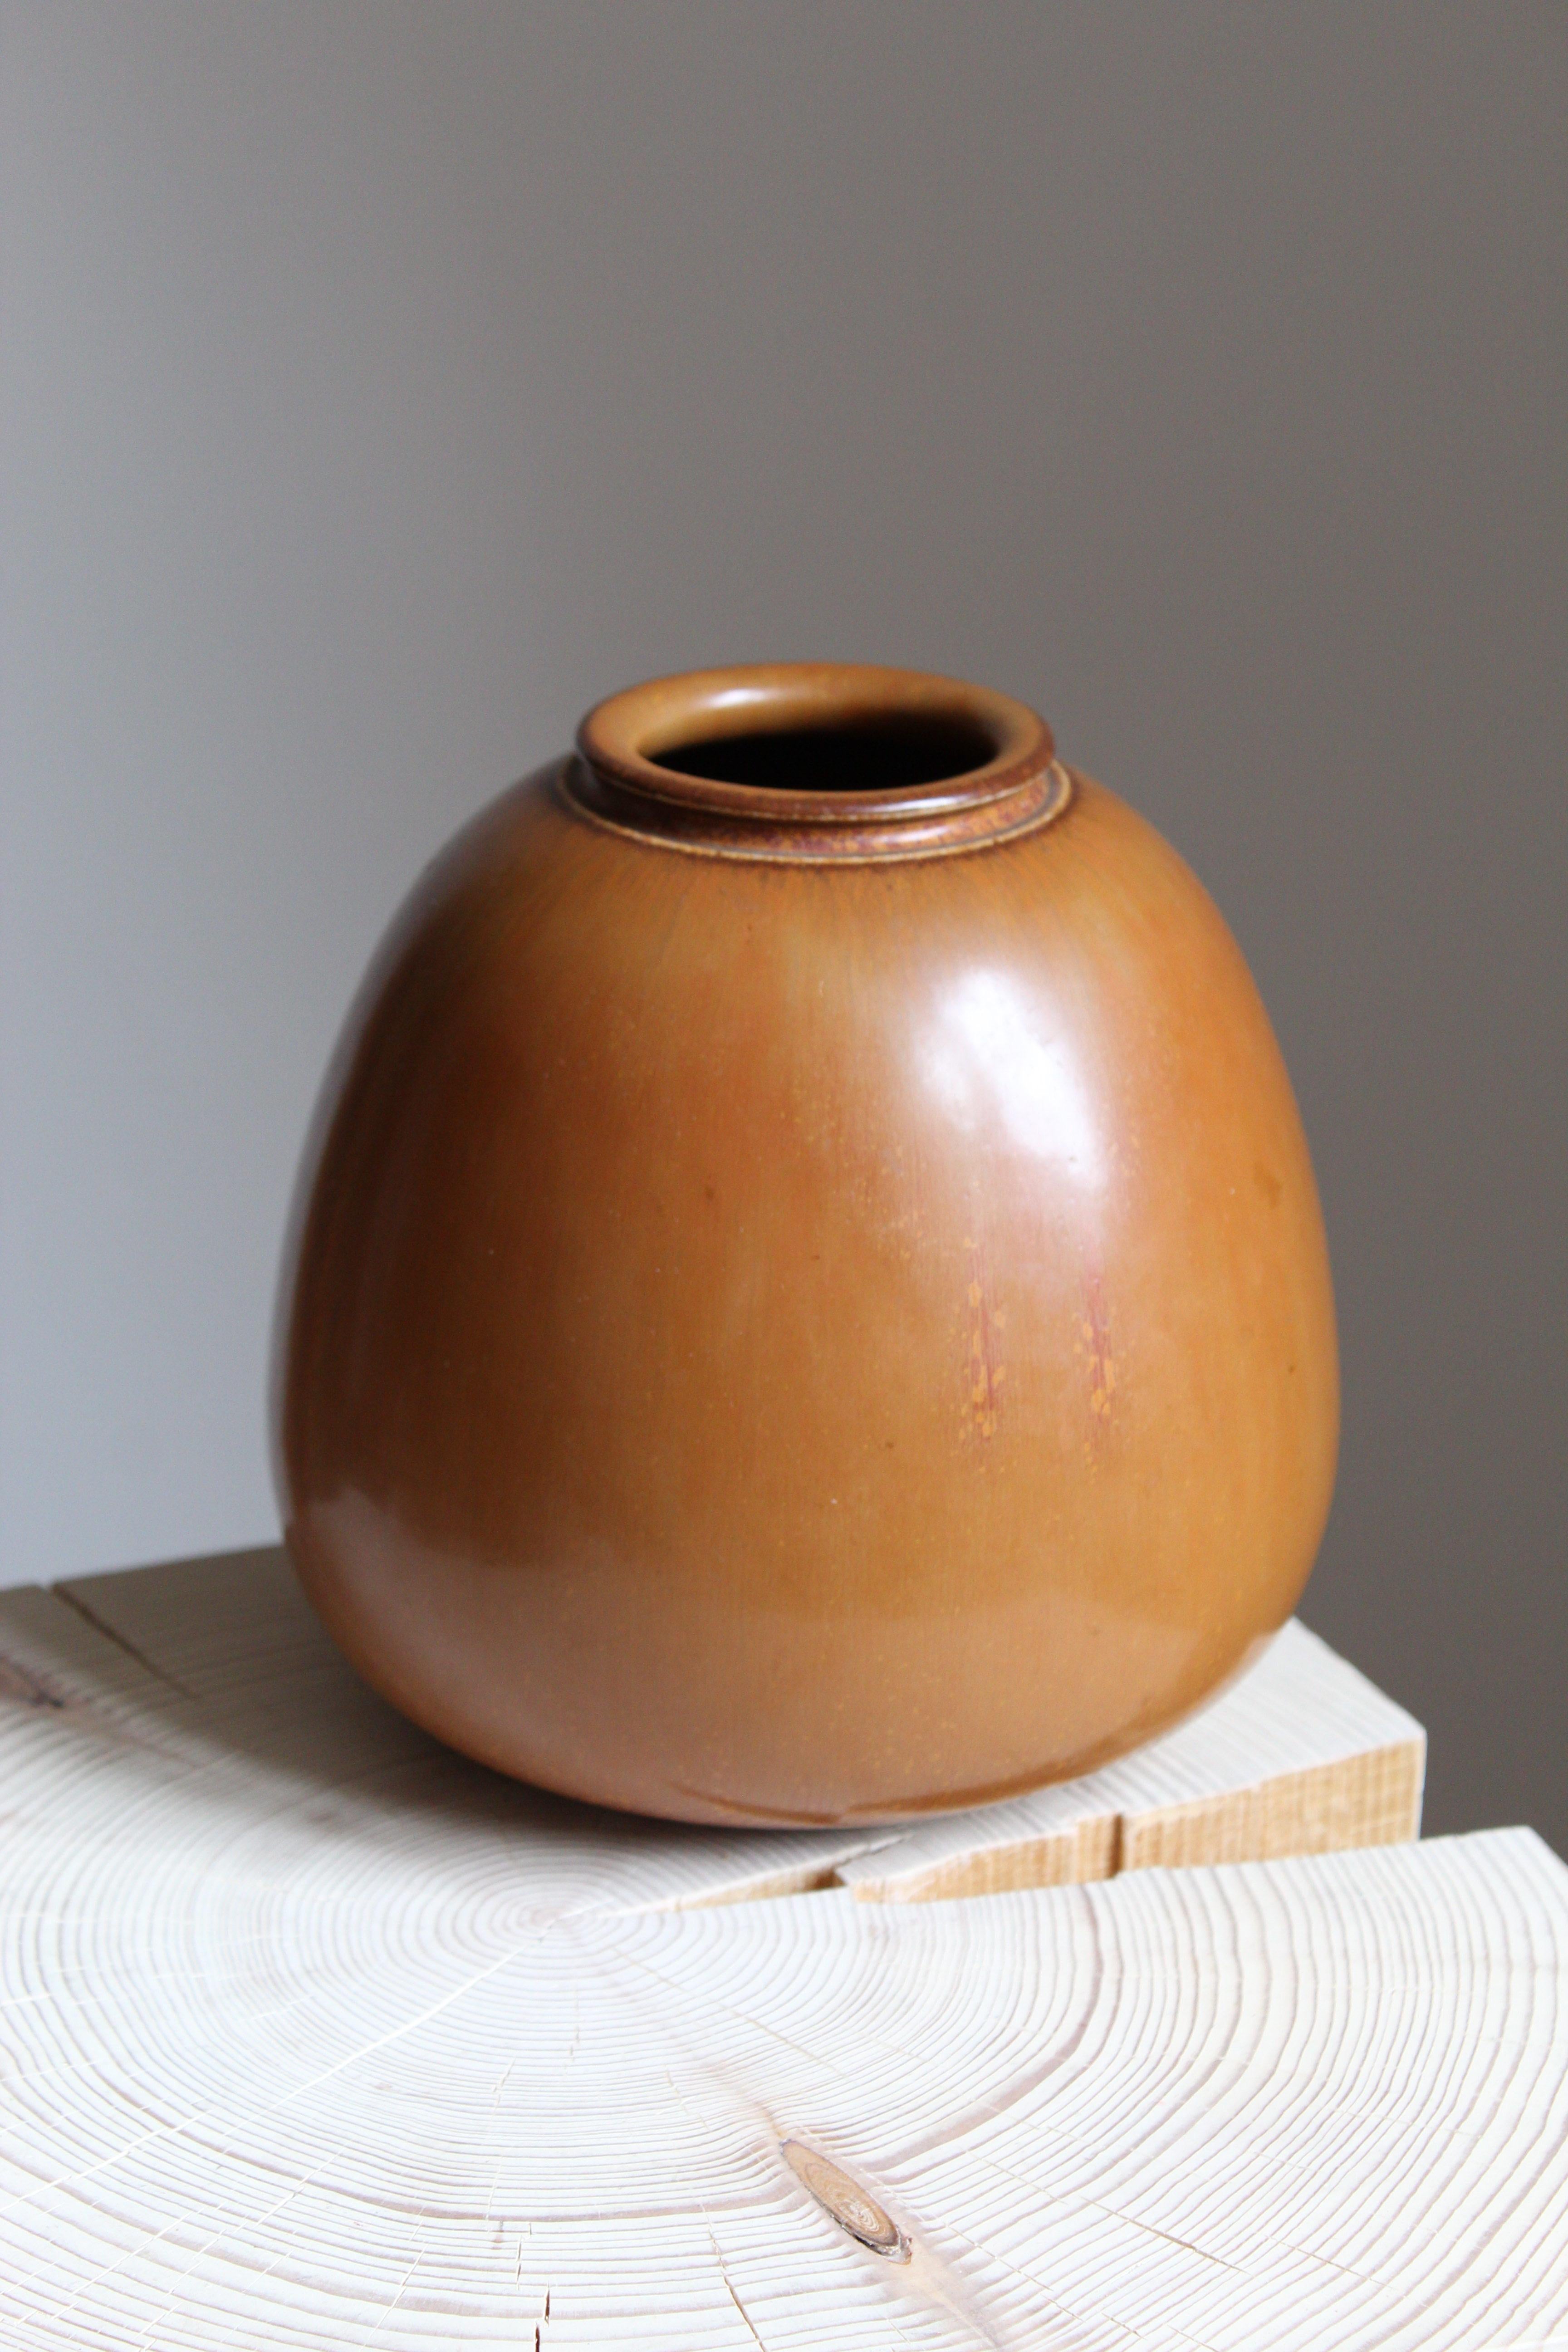 A vase, produced by Saxbo, Denmark, 1950s. Possibly designed by Eva Stæhr-Nielsen

Other designers of the period include Gunnar Nylund, Axel Salto, Carl-Harry Stålhane, Wilhelm Kåge, and Arne Bang.